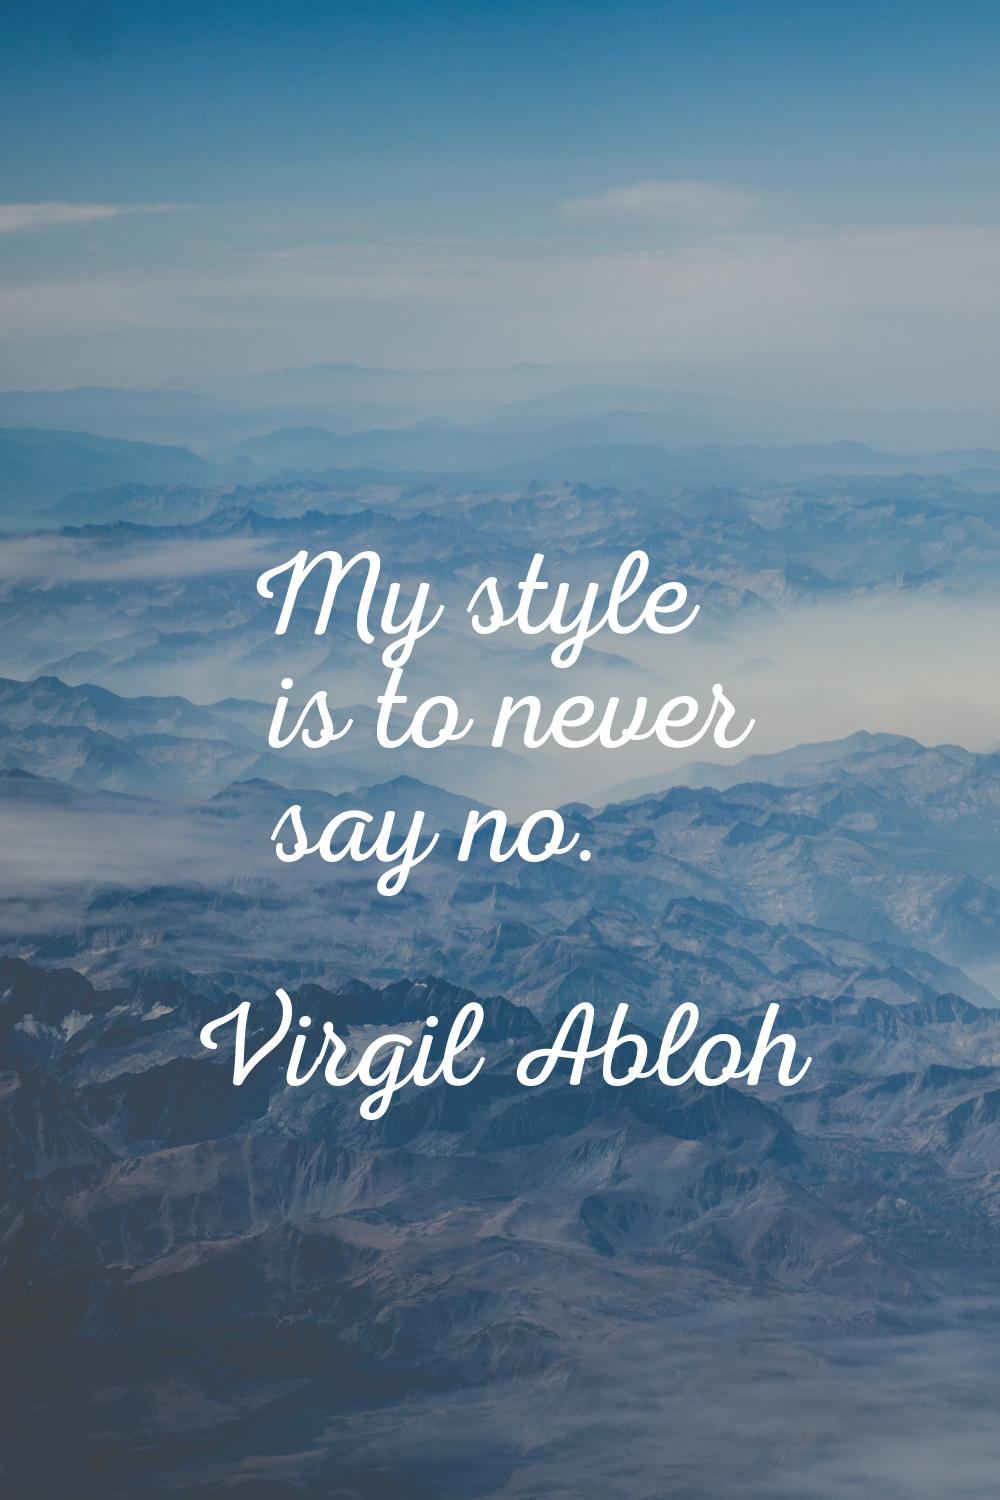 My style is to never say no.